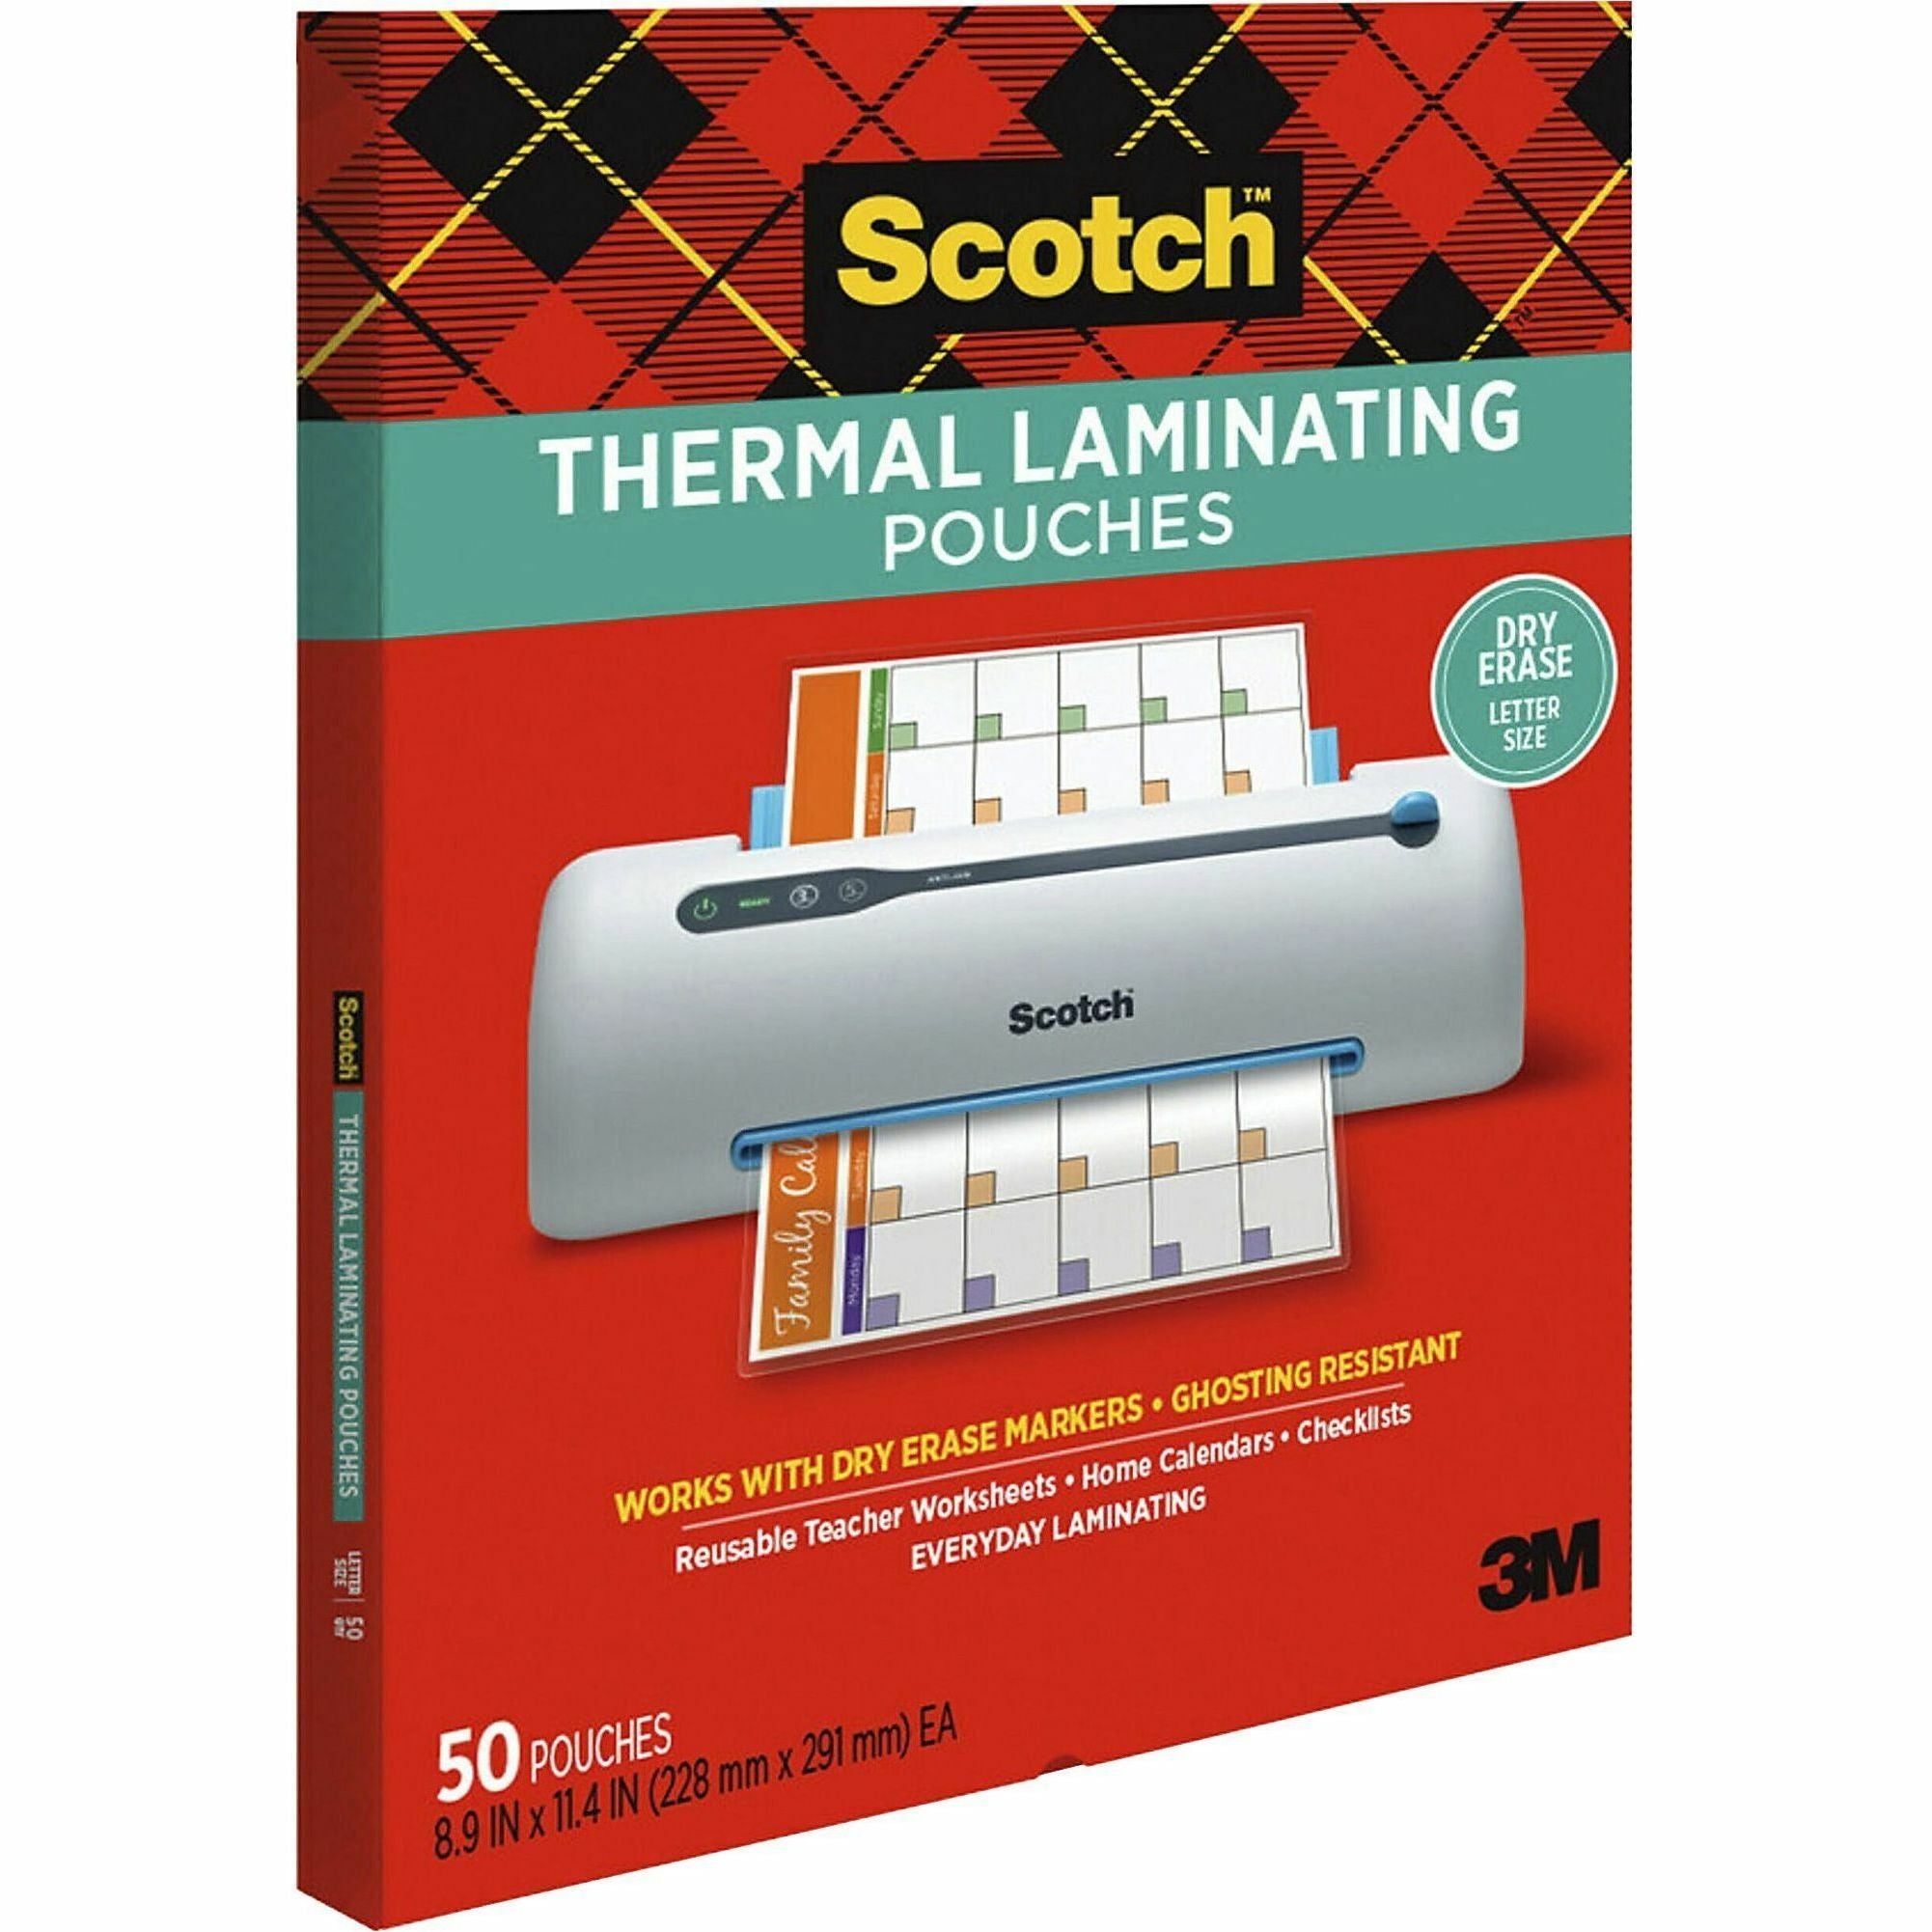 scotch-laminating-pouch-sheet-size-supported-letter-laminating-pouch-sheet-size-890-width-x-1140-length-for-document-artwork-sign-flyer-schedule-certificate-home-office-classroom-paper-photo-safe-tear-proof-spill-resistant-_mmmtp385450de - 2